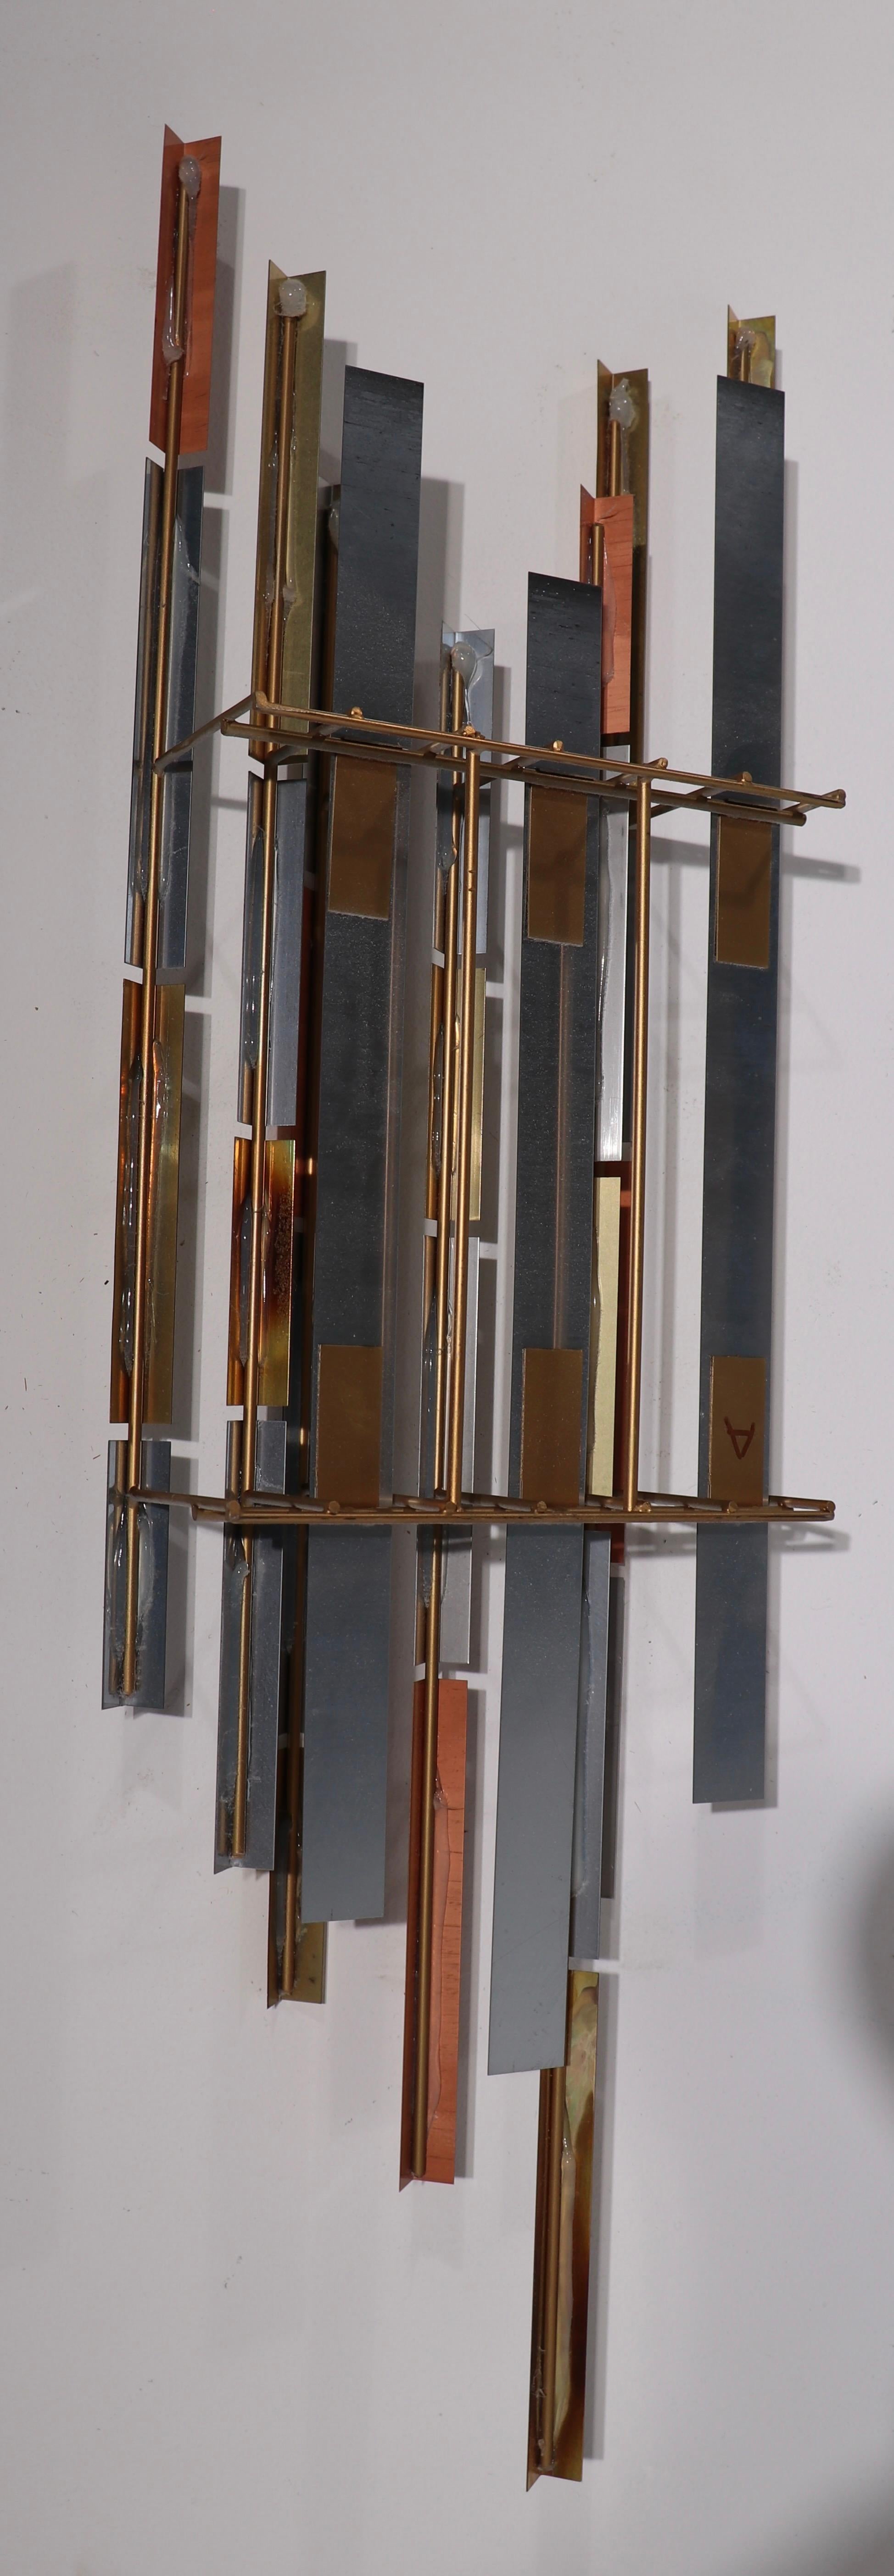 Mixed Metal Modernist Wall Mount Sculpture by R. Berger, 1993 For Sale 5